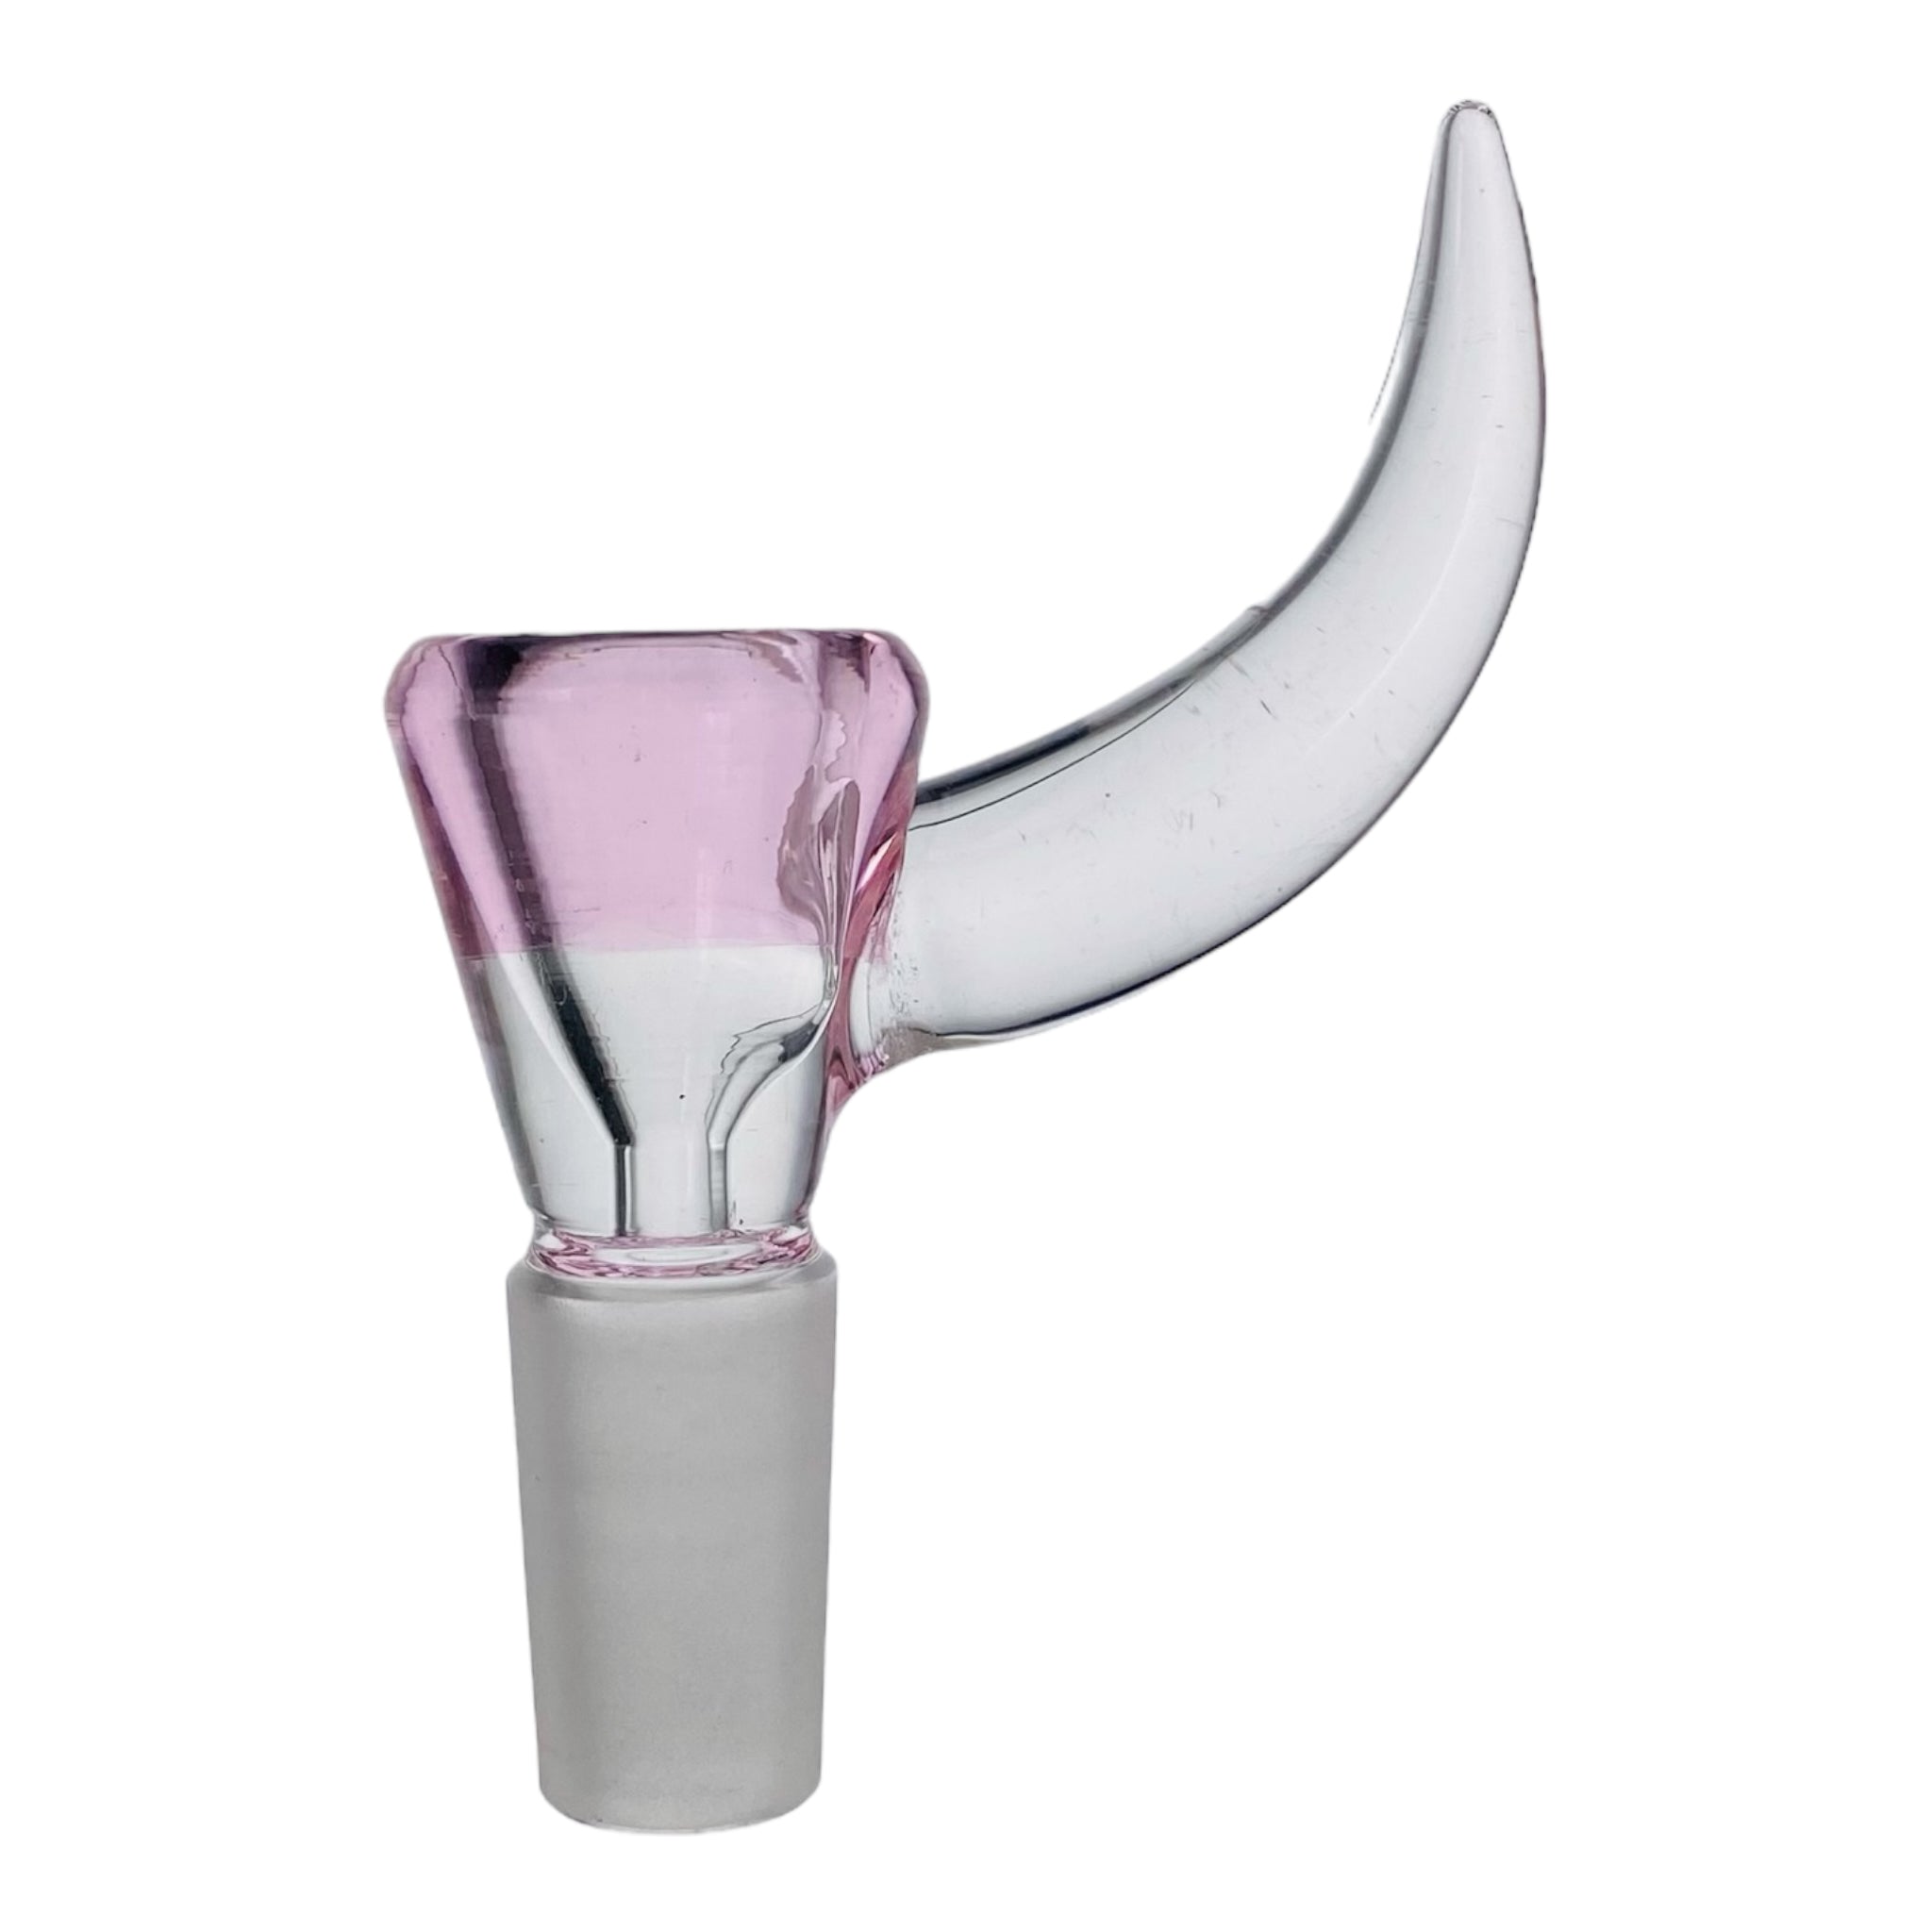 14mm Flower Bowl - Pink Funnel With Large Handle